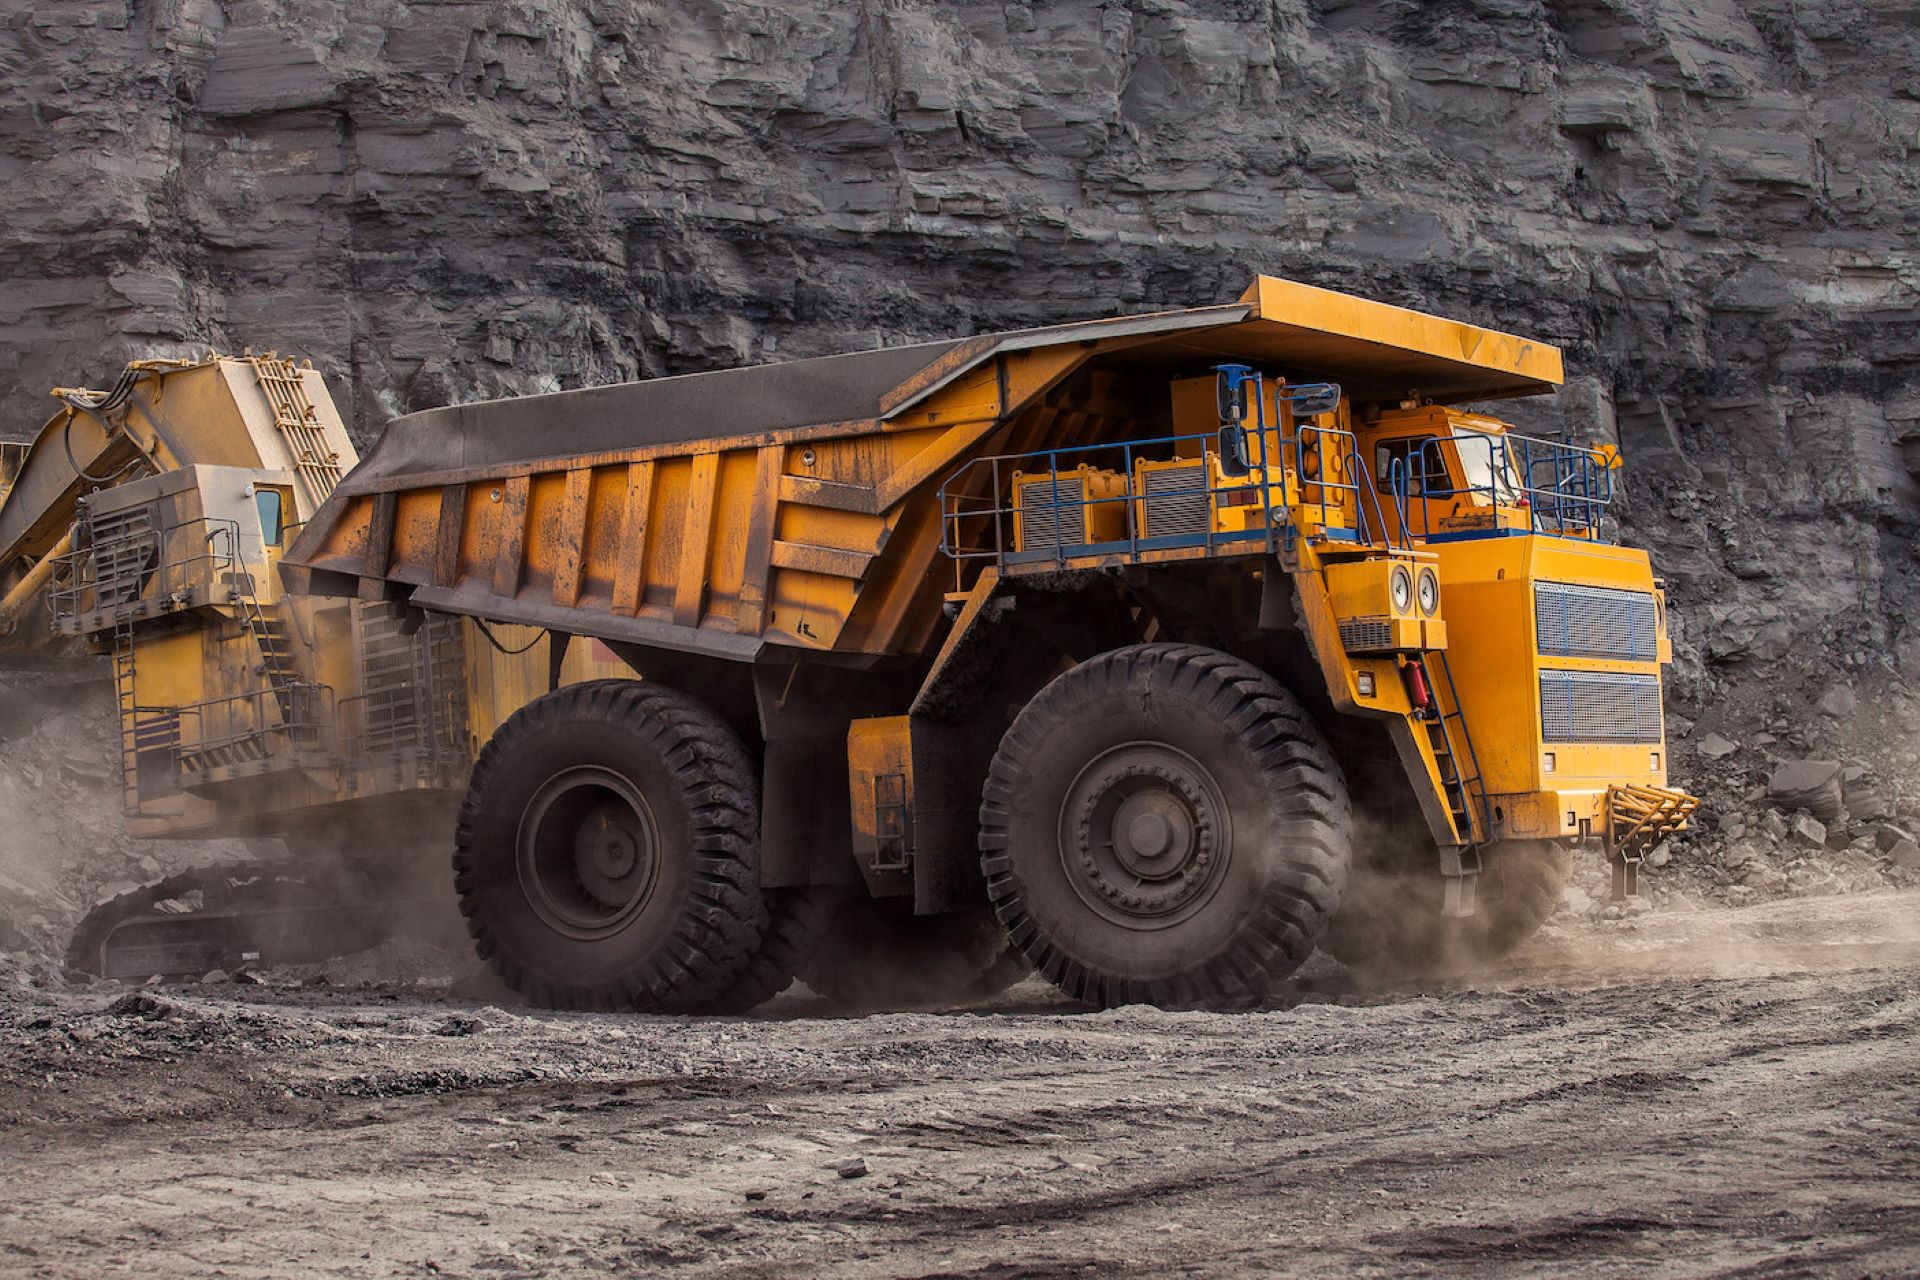 McLaren Applied’s Fuel Analytics Service makes instant impact on productivity and efficiency, expediting decarbonisation of global mining industry